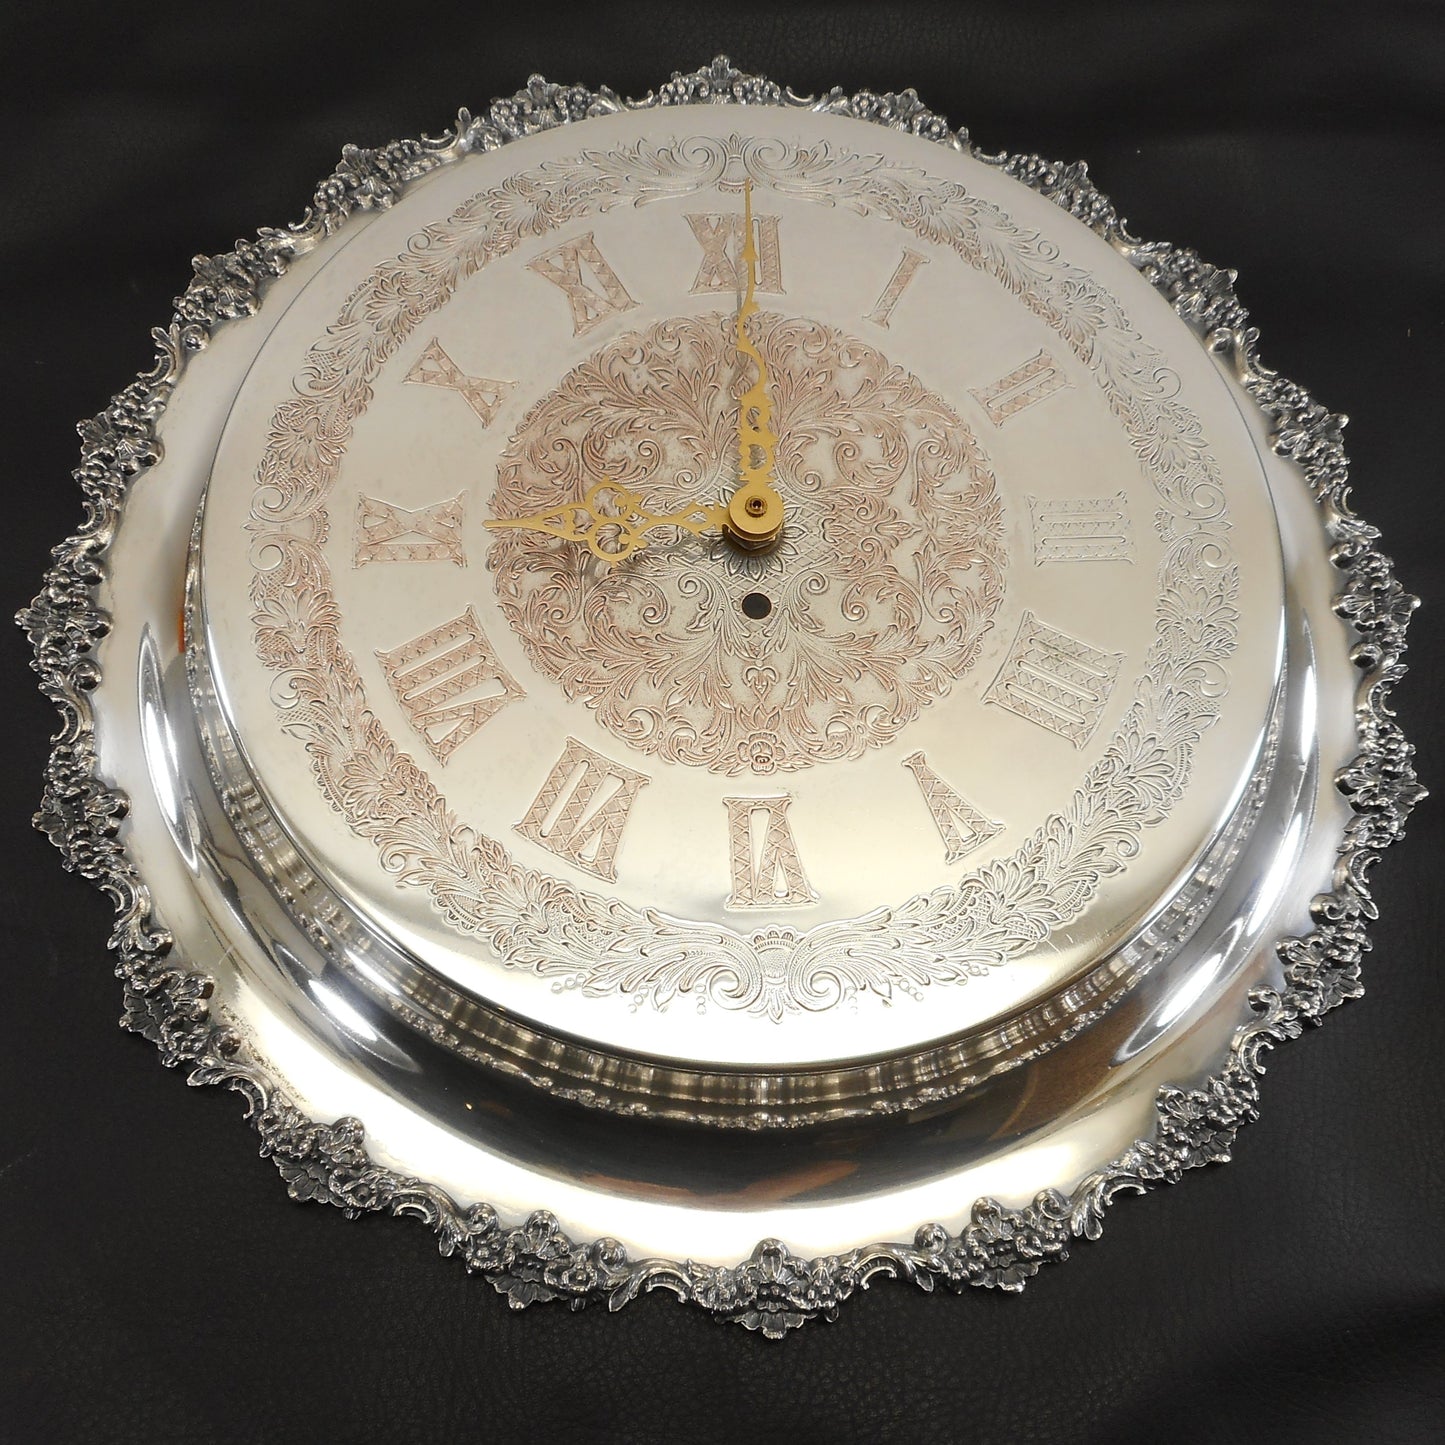 Unbranded Vintage Silver Plate Engraved 16.5" Wall Clock Ornate Roman Numerals Antique